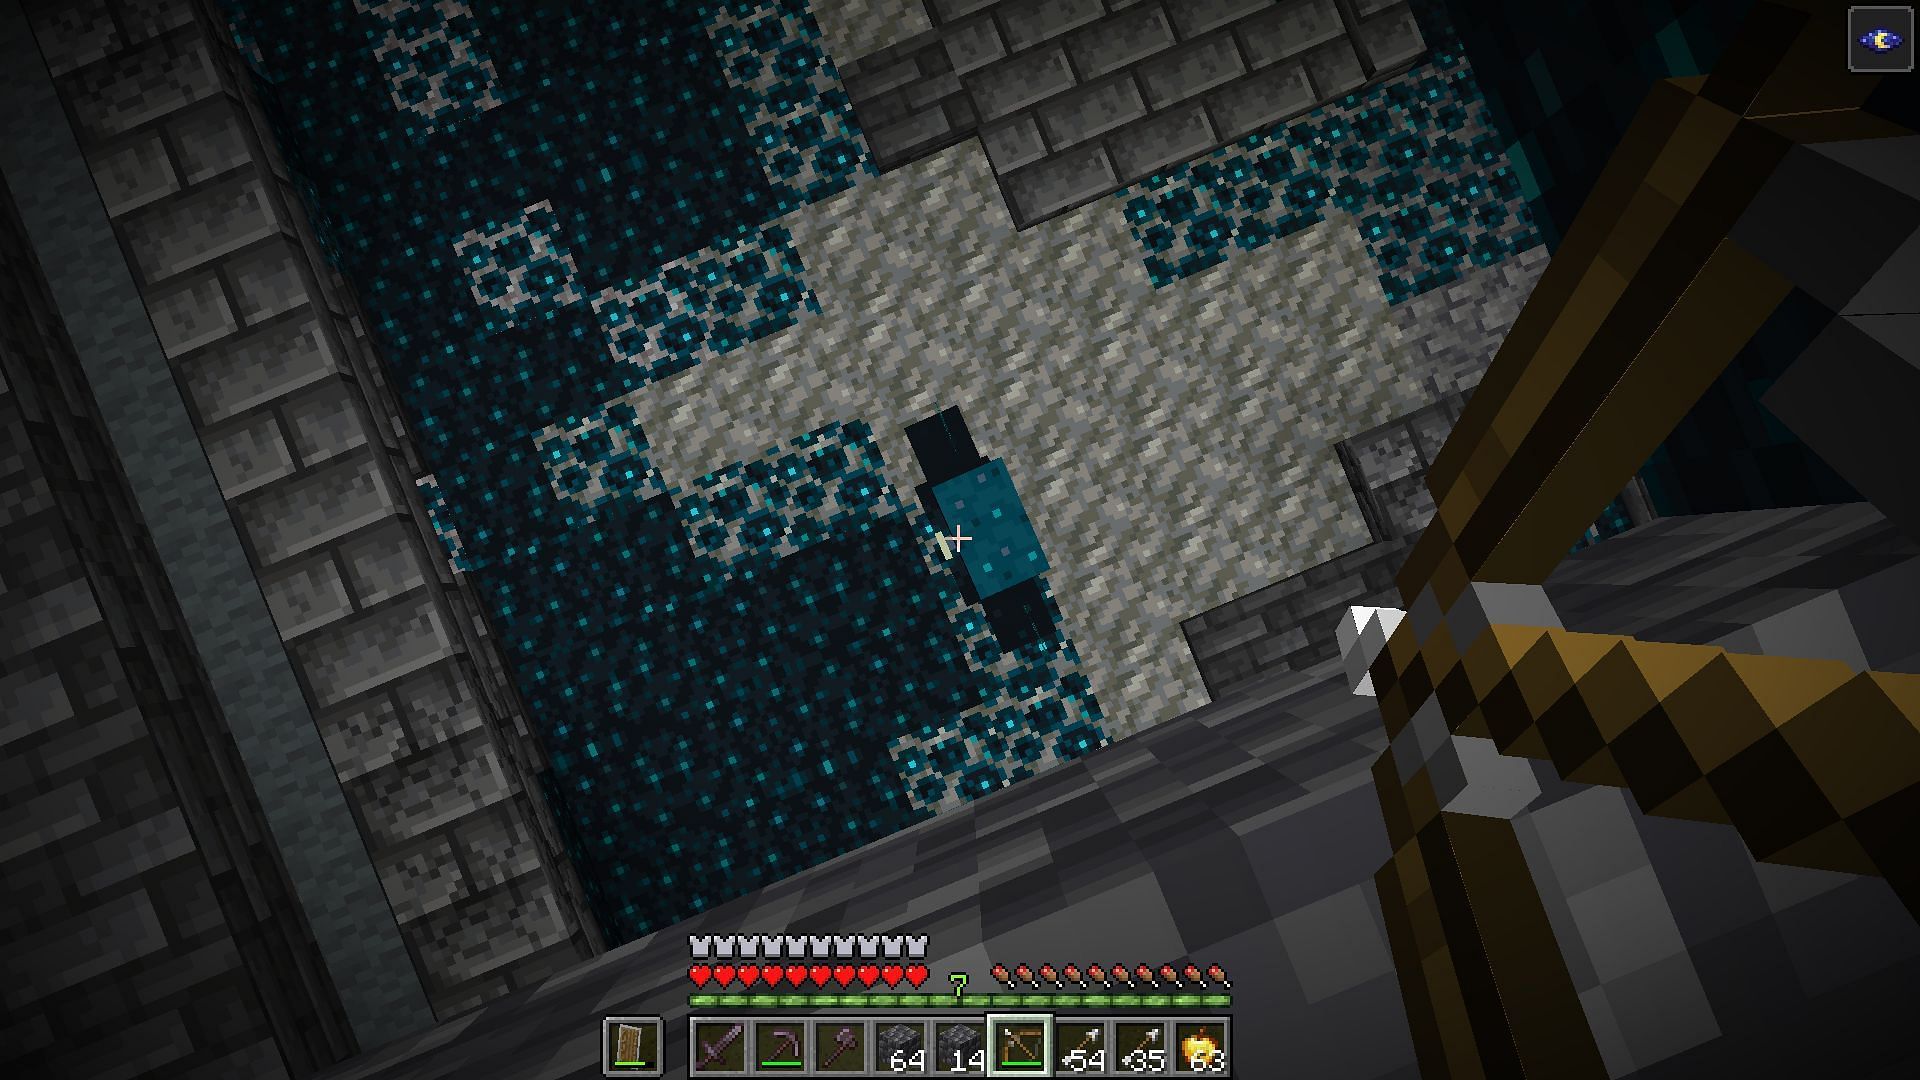 Attack the Warden from far to defeat it in Minecraft 1.19 (Image via Mojang)